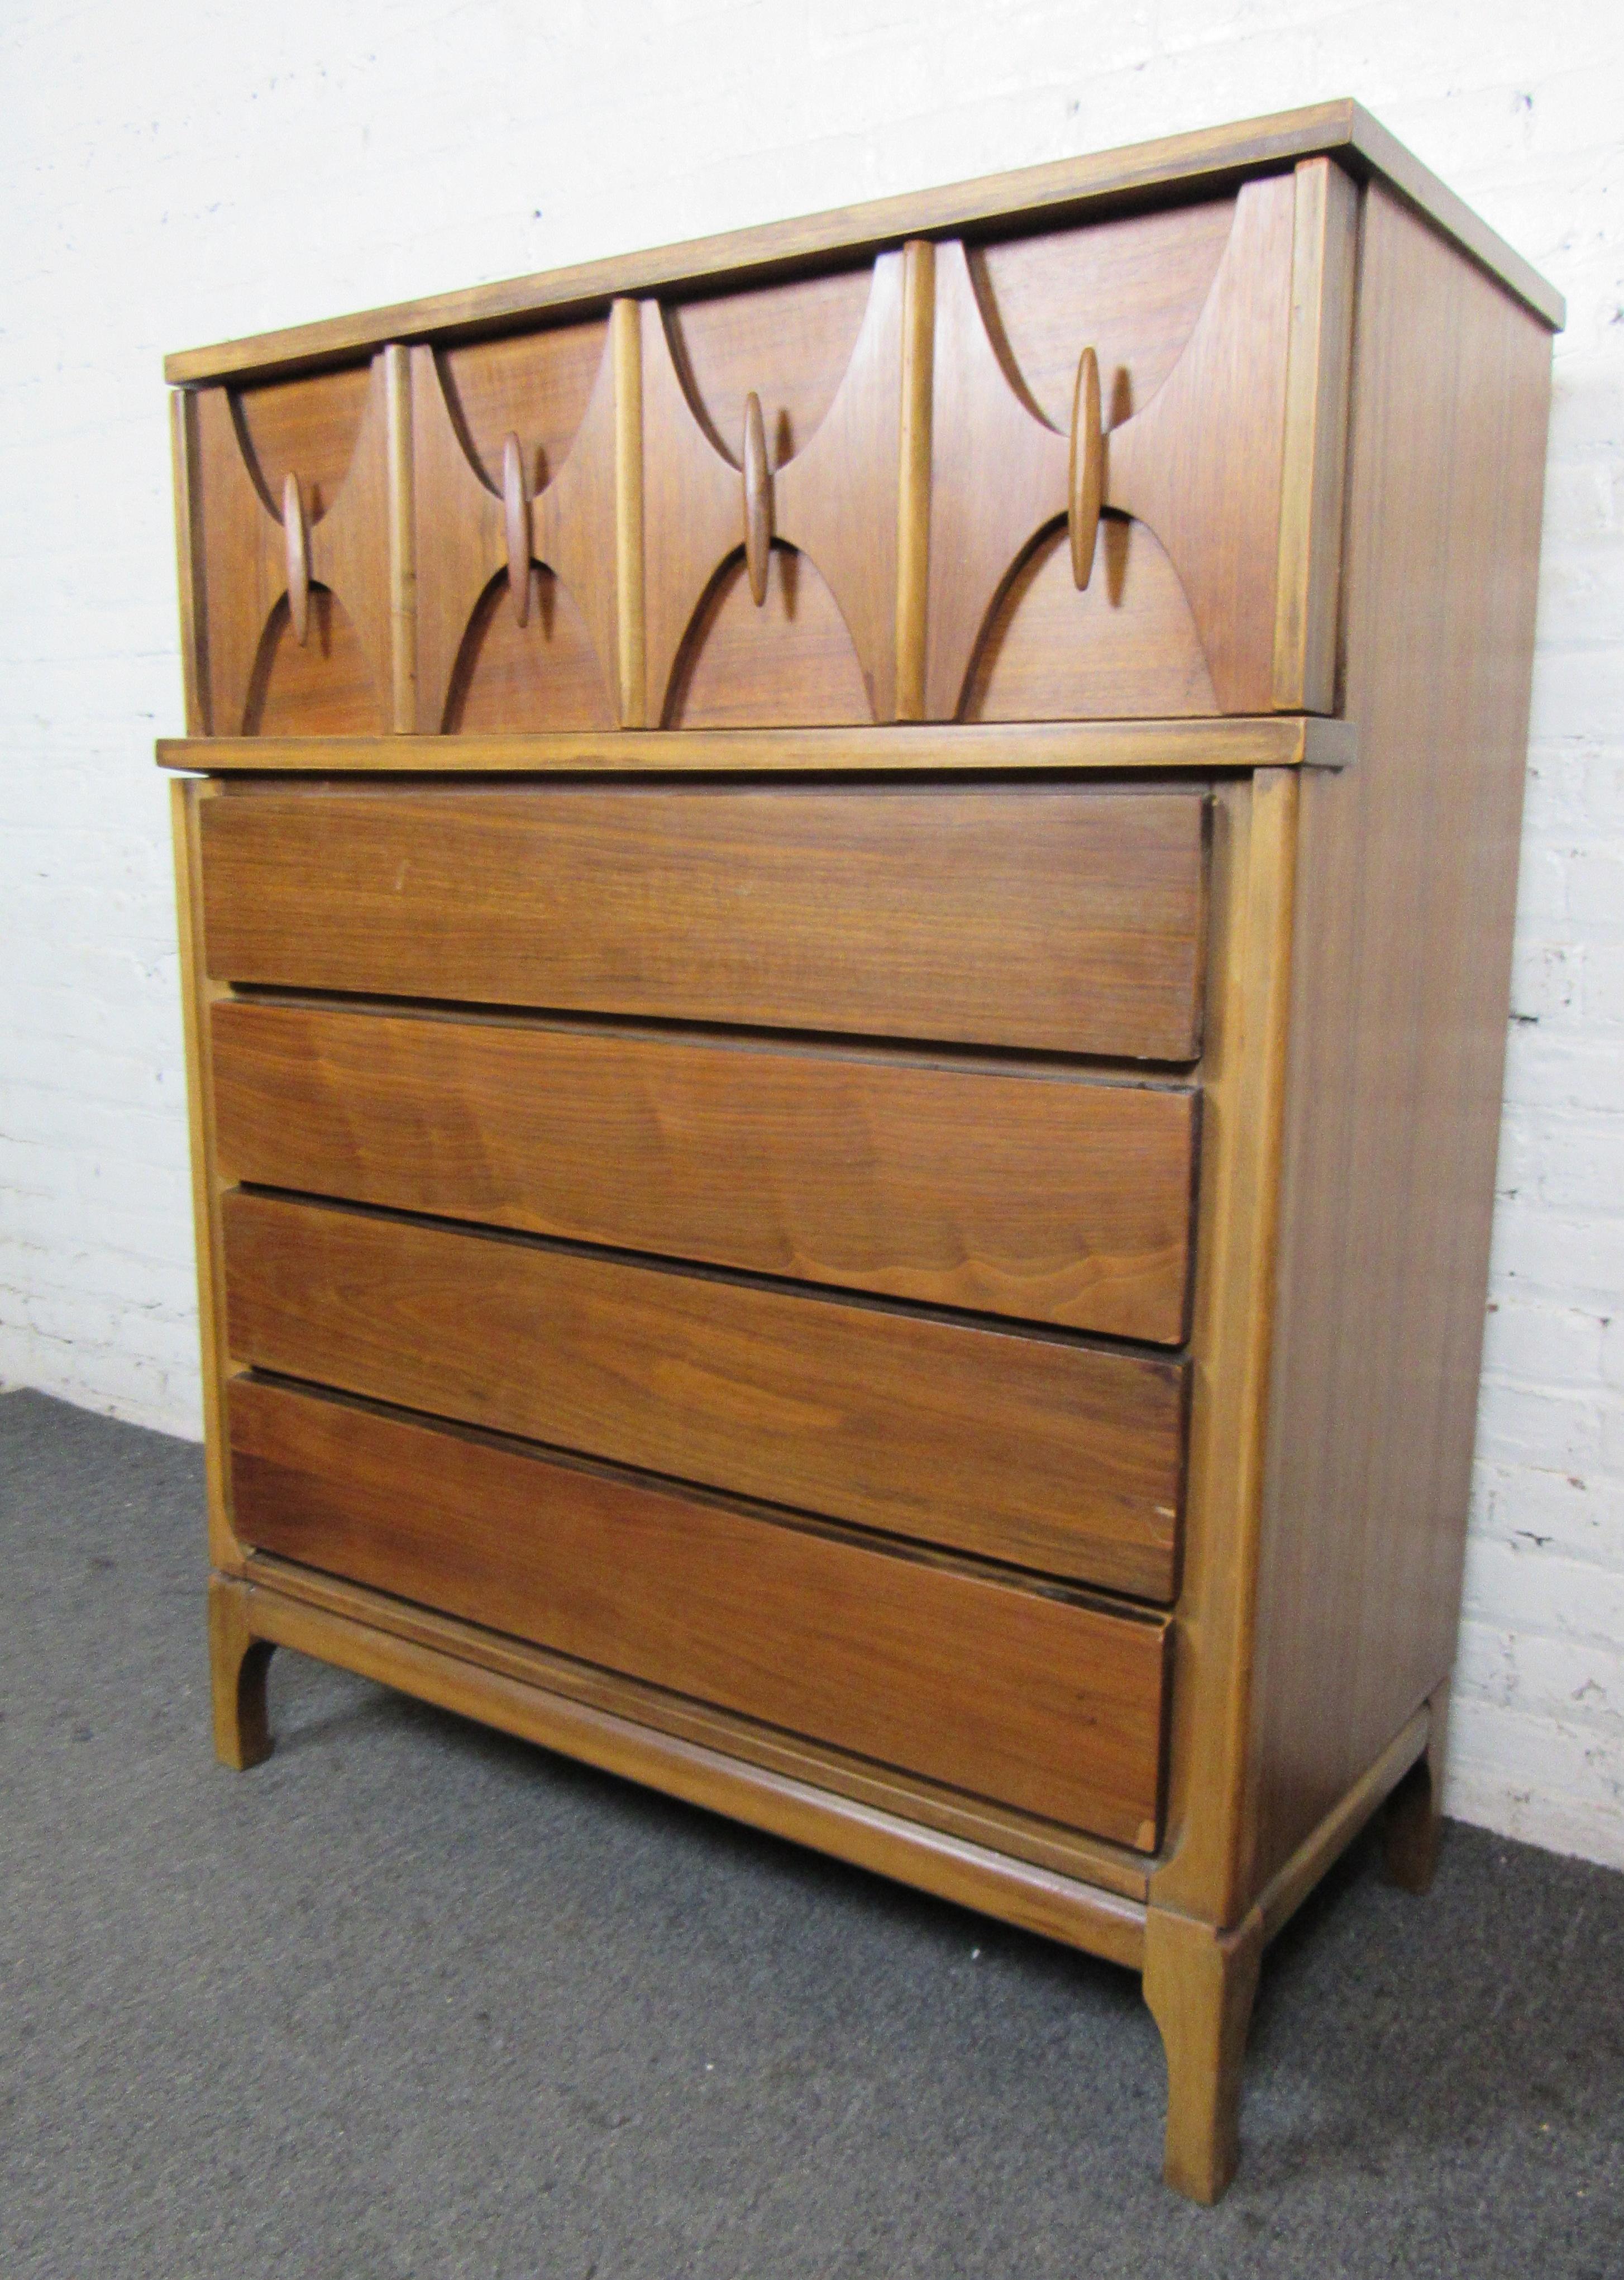 American made chest of drawers in walnut with beautifully sculpted top drawer. 
(Please confirm location NY or NJ).